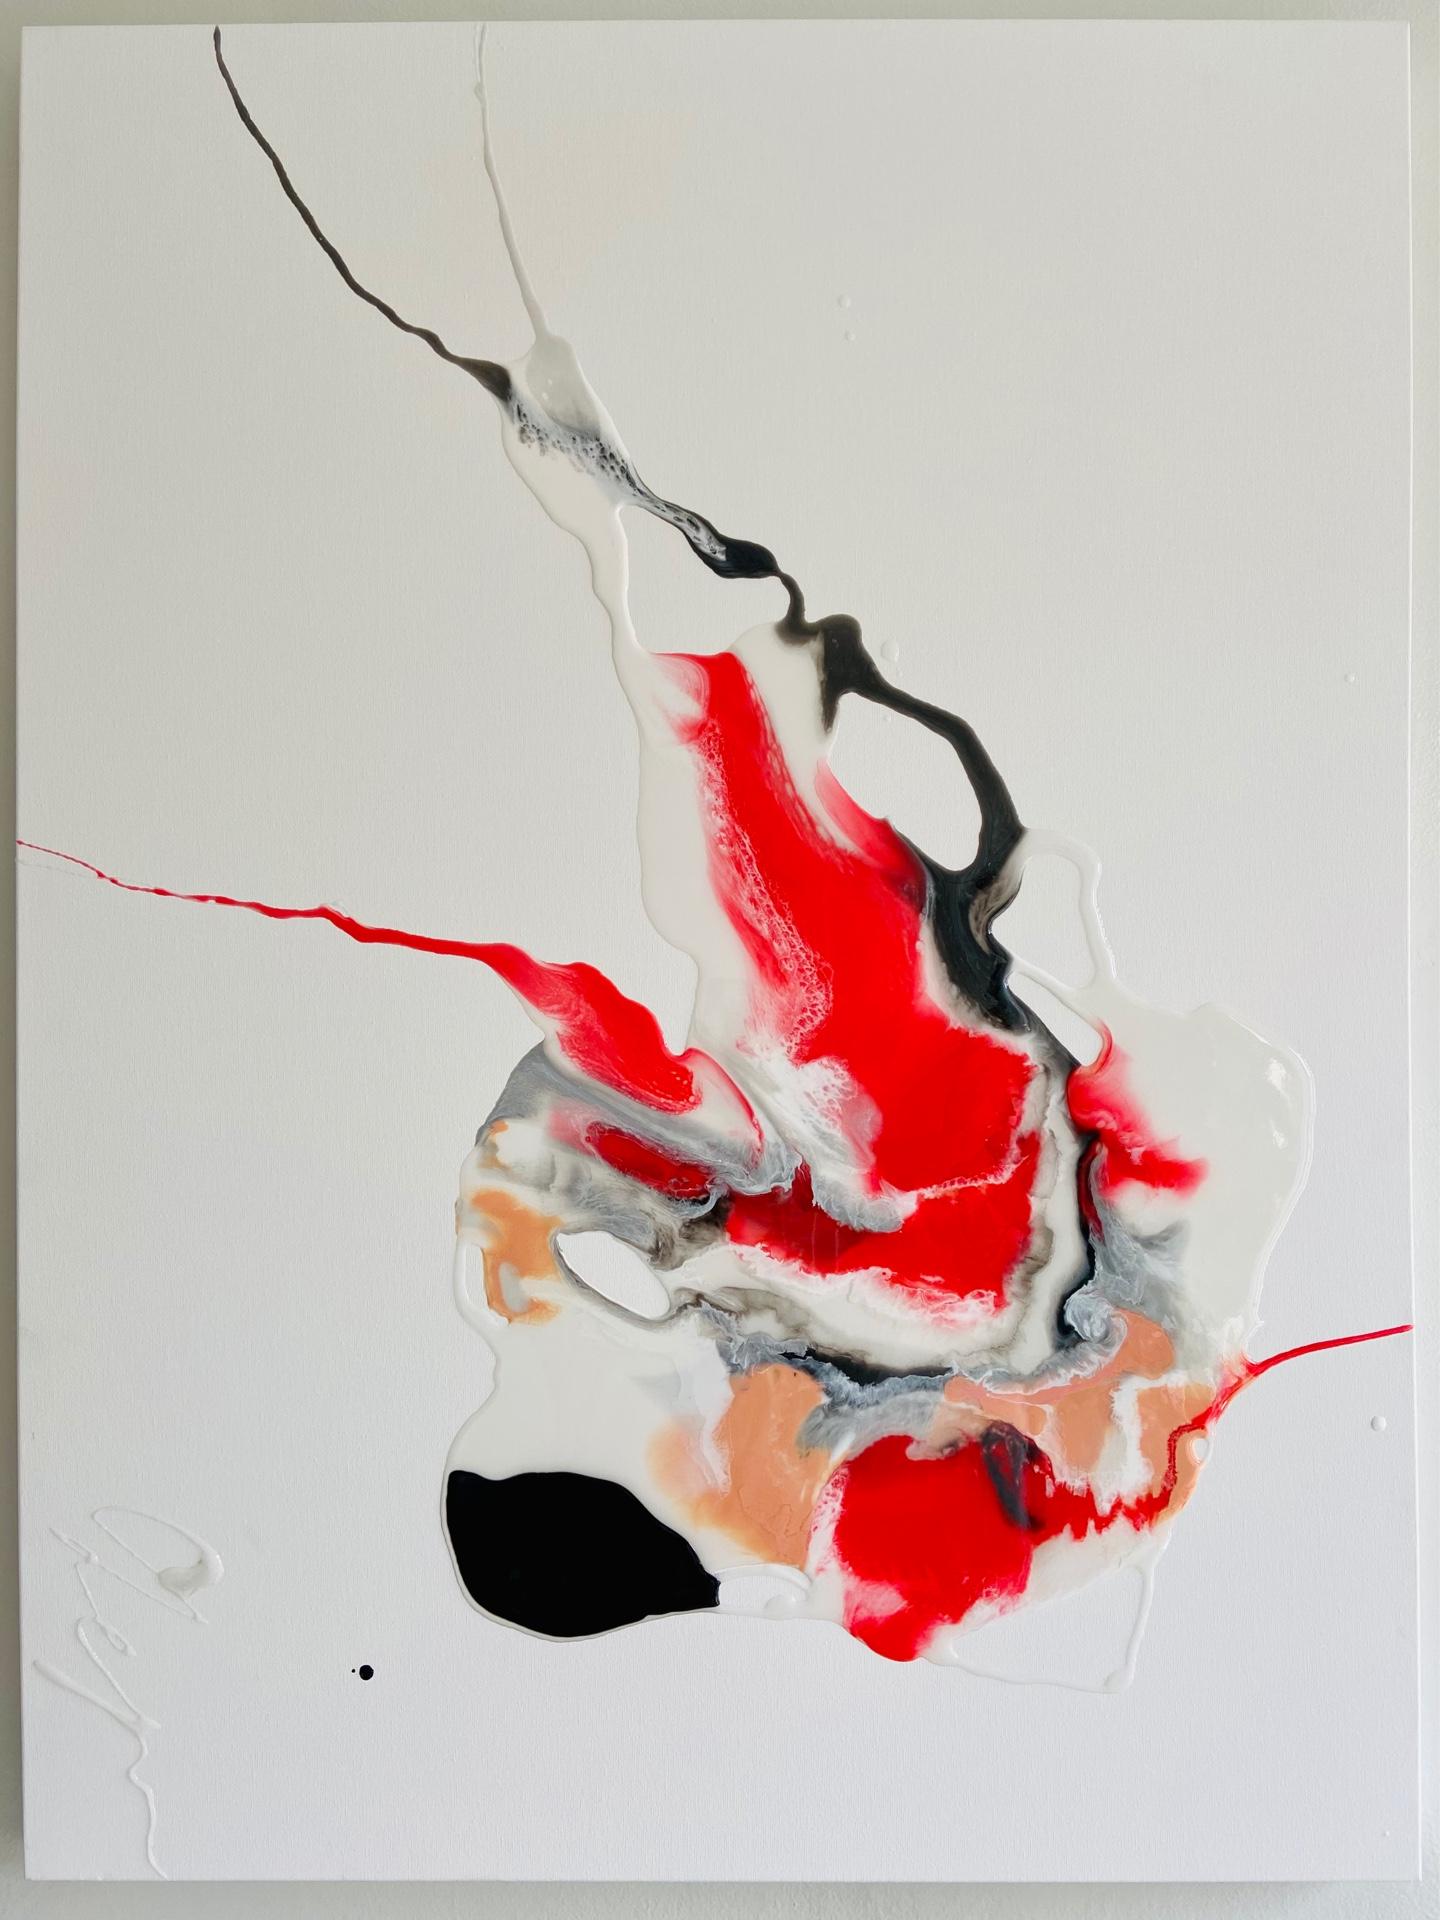 Man's Heart (Human Heart) - abstract painting in red, black, white, peach color